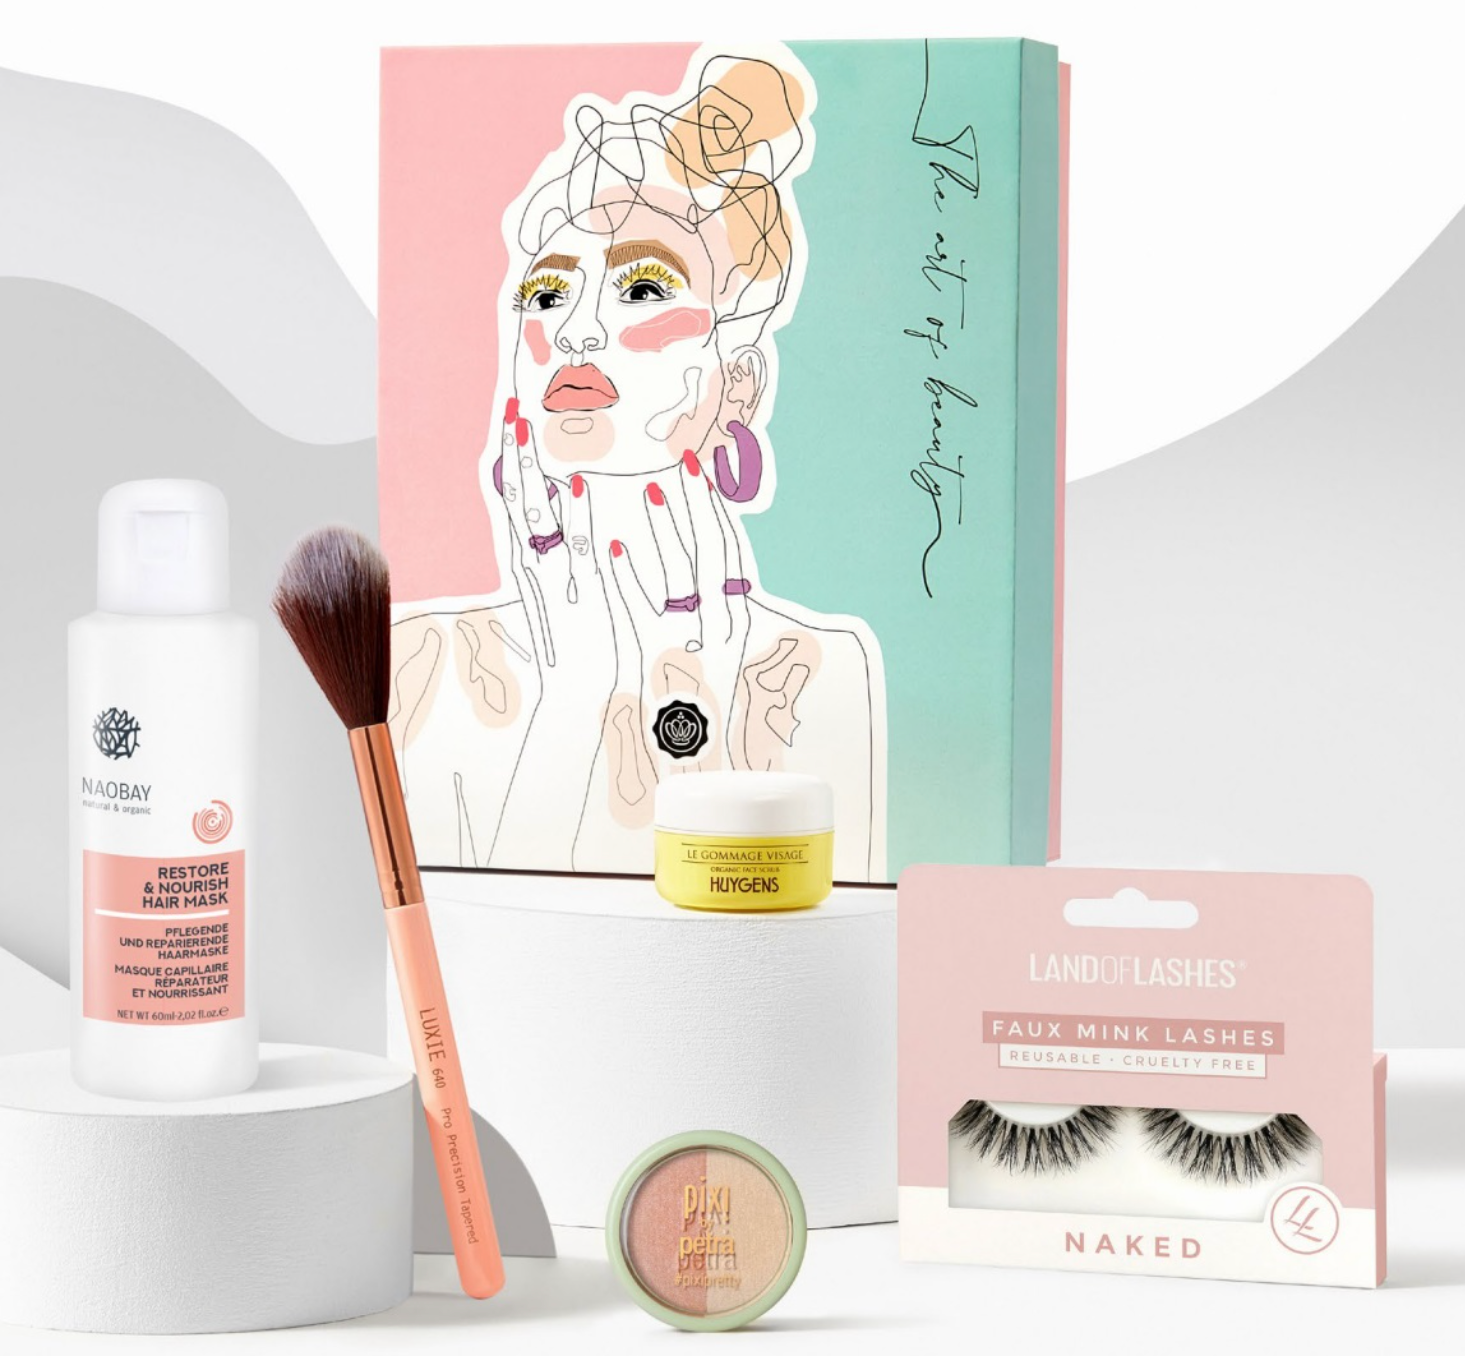 Glossybox August Contents 2022